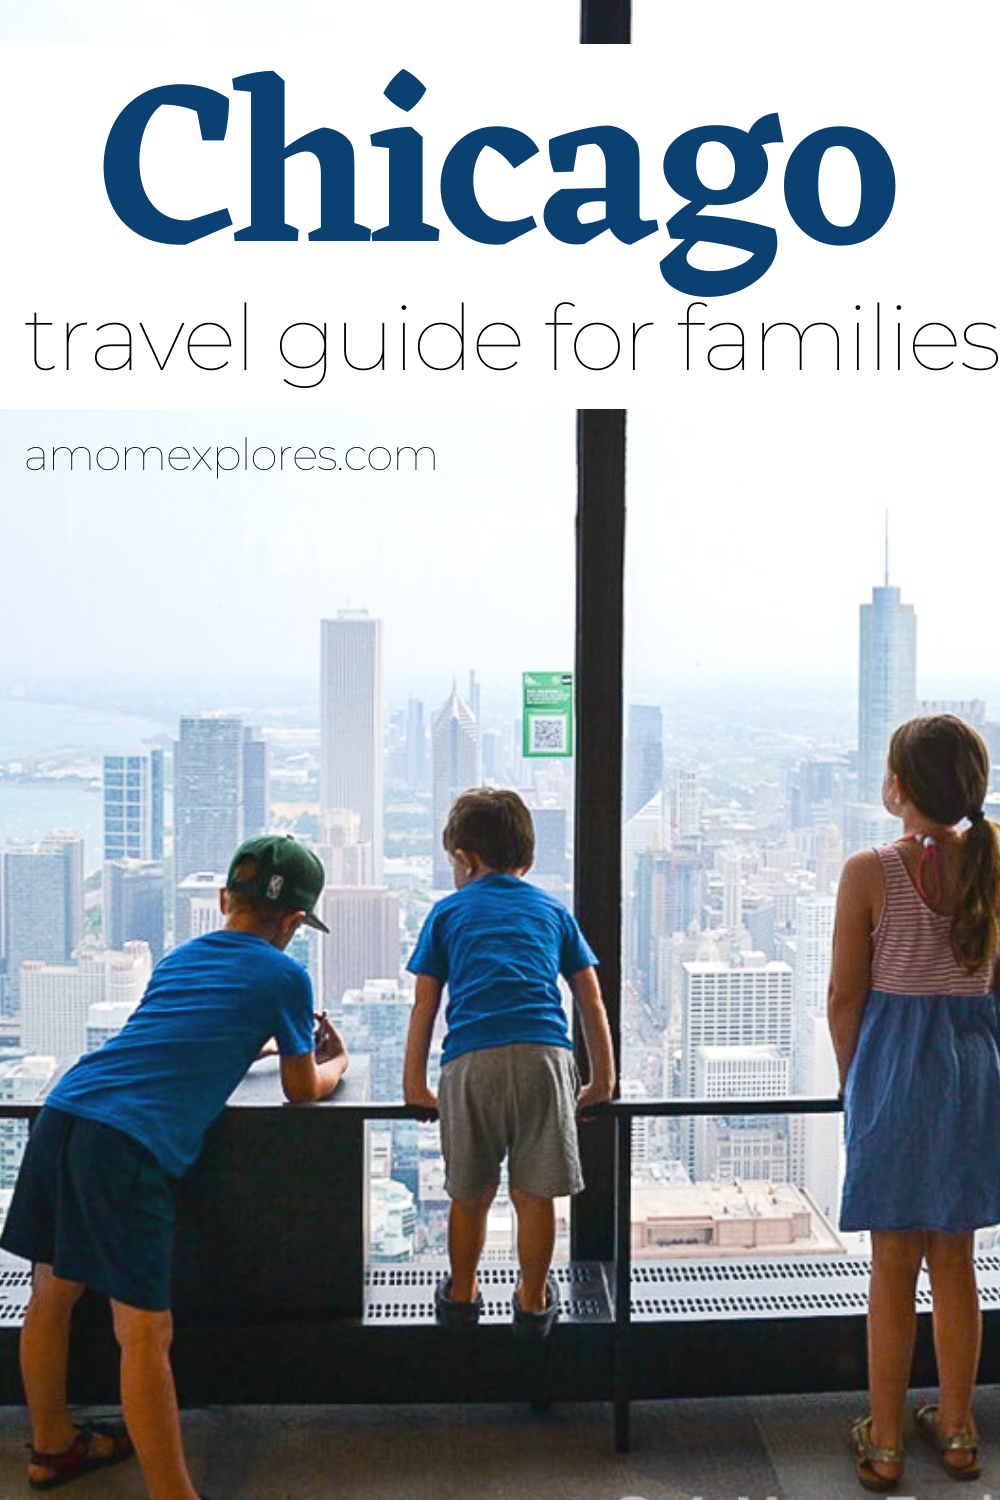 Chicago travel guide for families.png